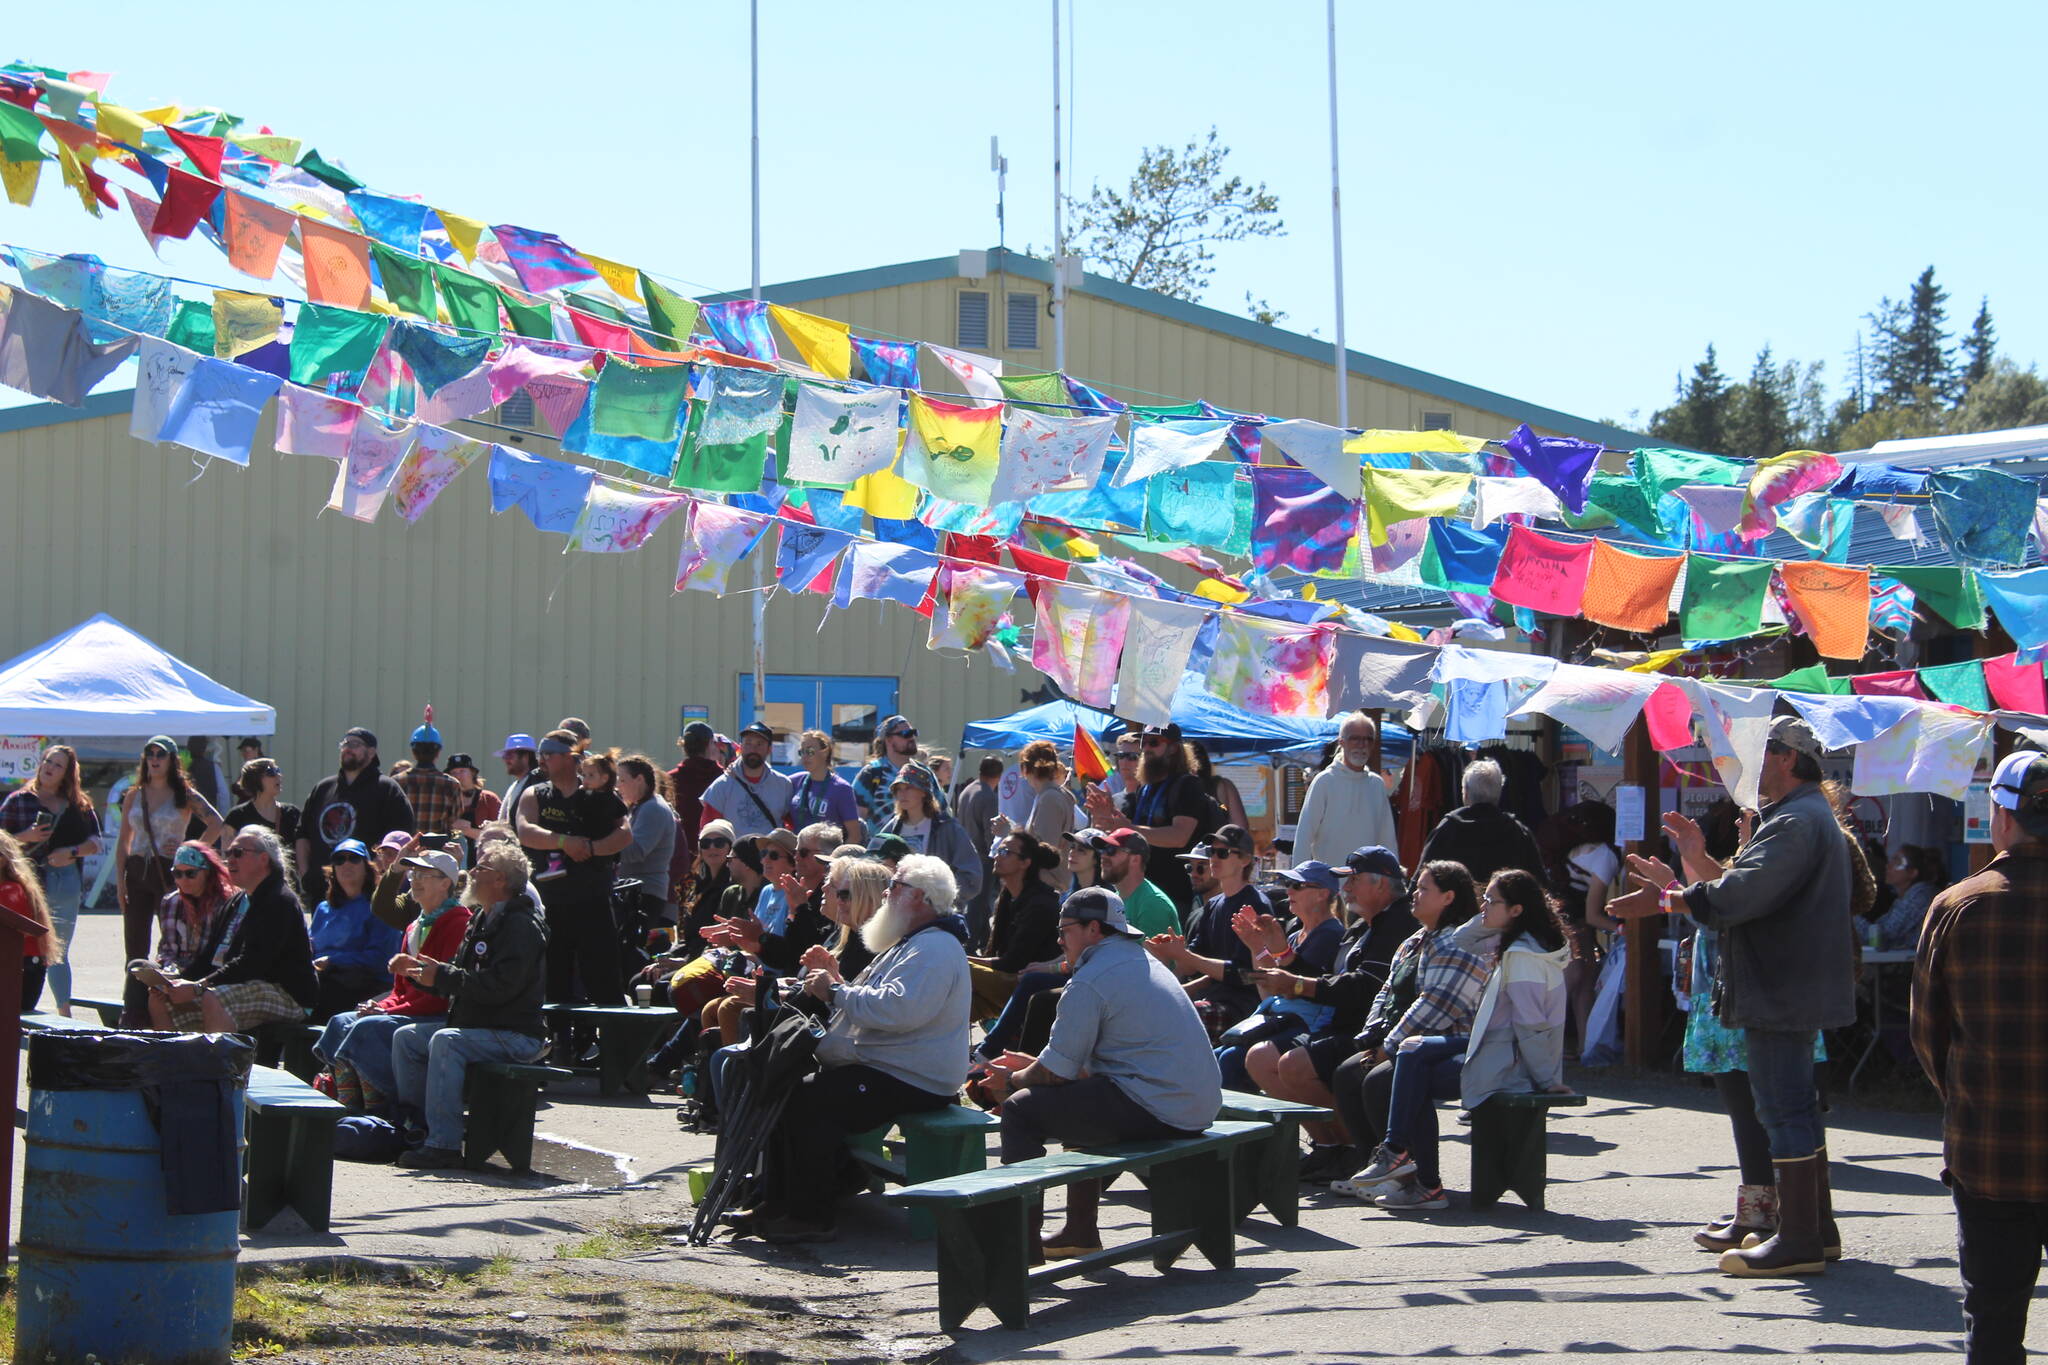 People gather in Ninilchik, Alaska, on Friday, Aug. 5, 2022, for Salmonfest, an annual event that raises awareness about salmon-related causes. (Ashlyn O’Hara/Peninsula Clarion)